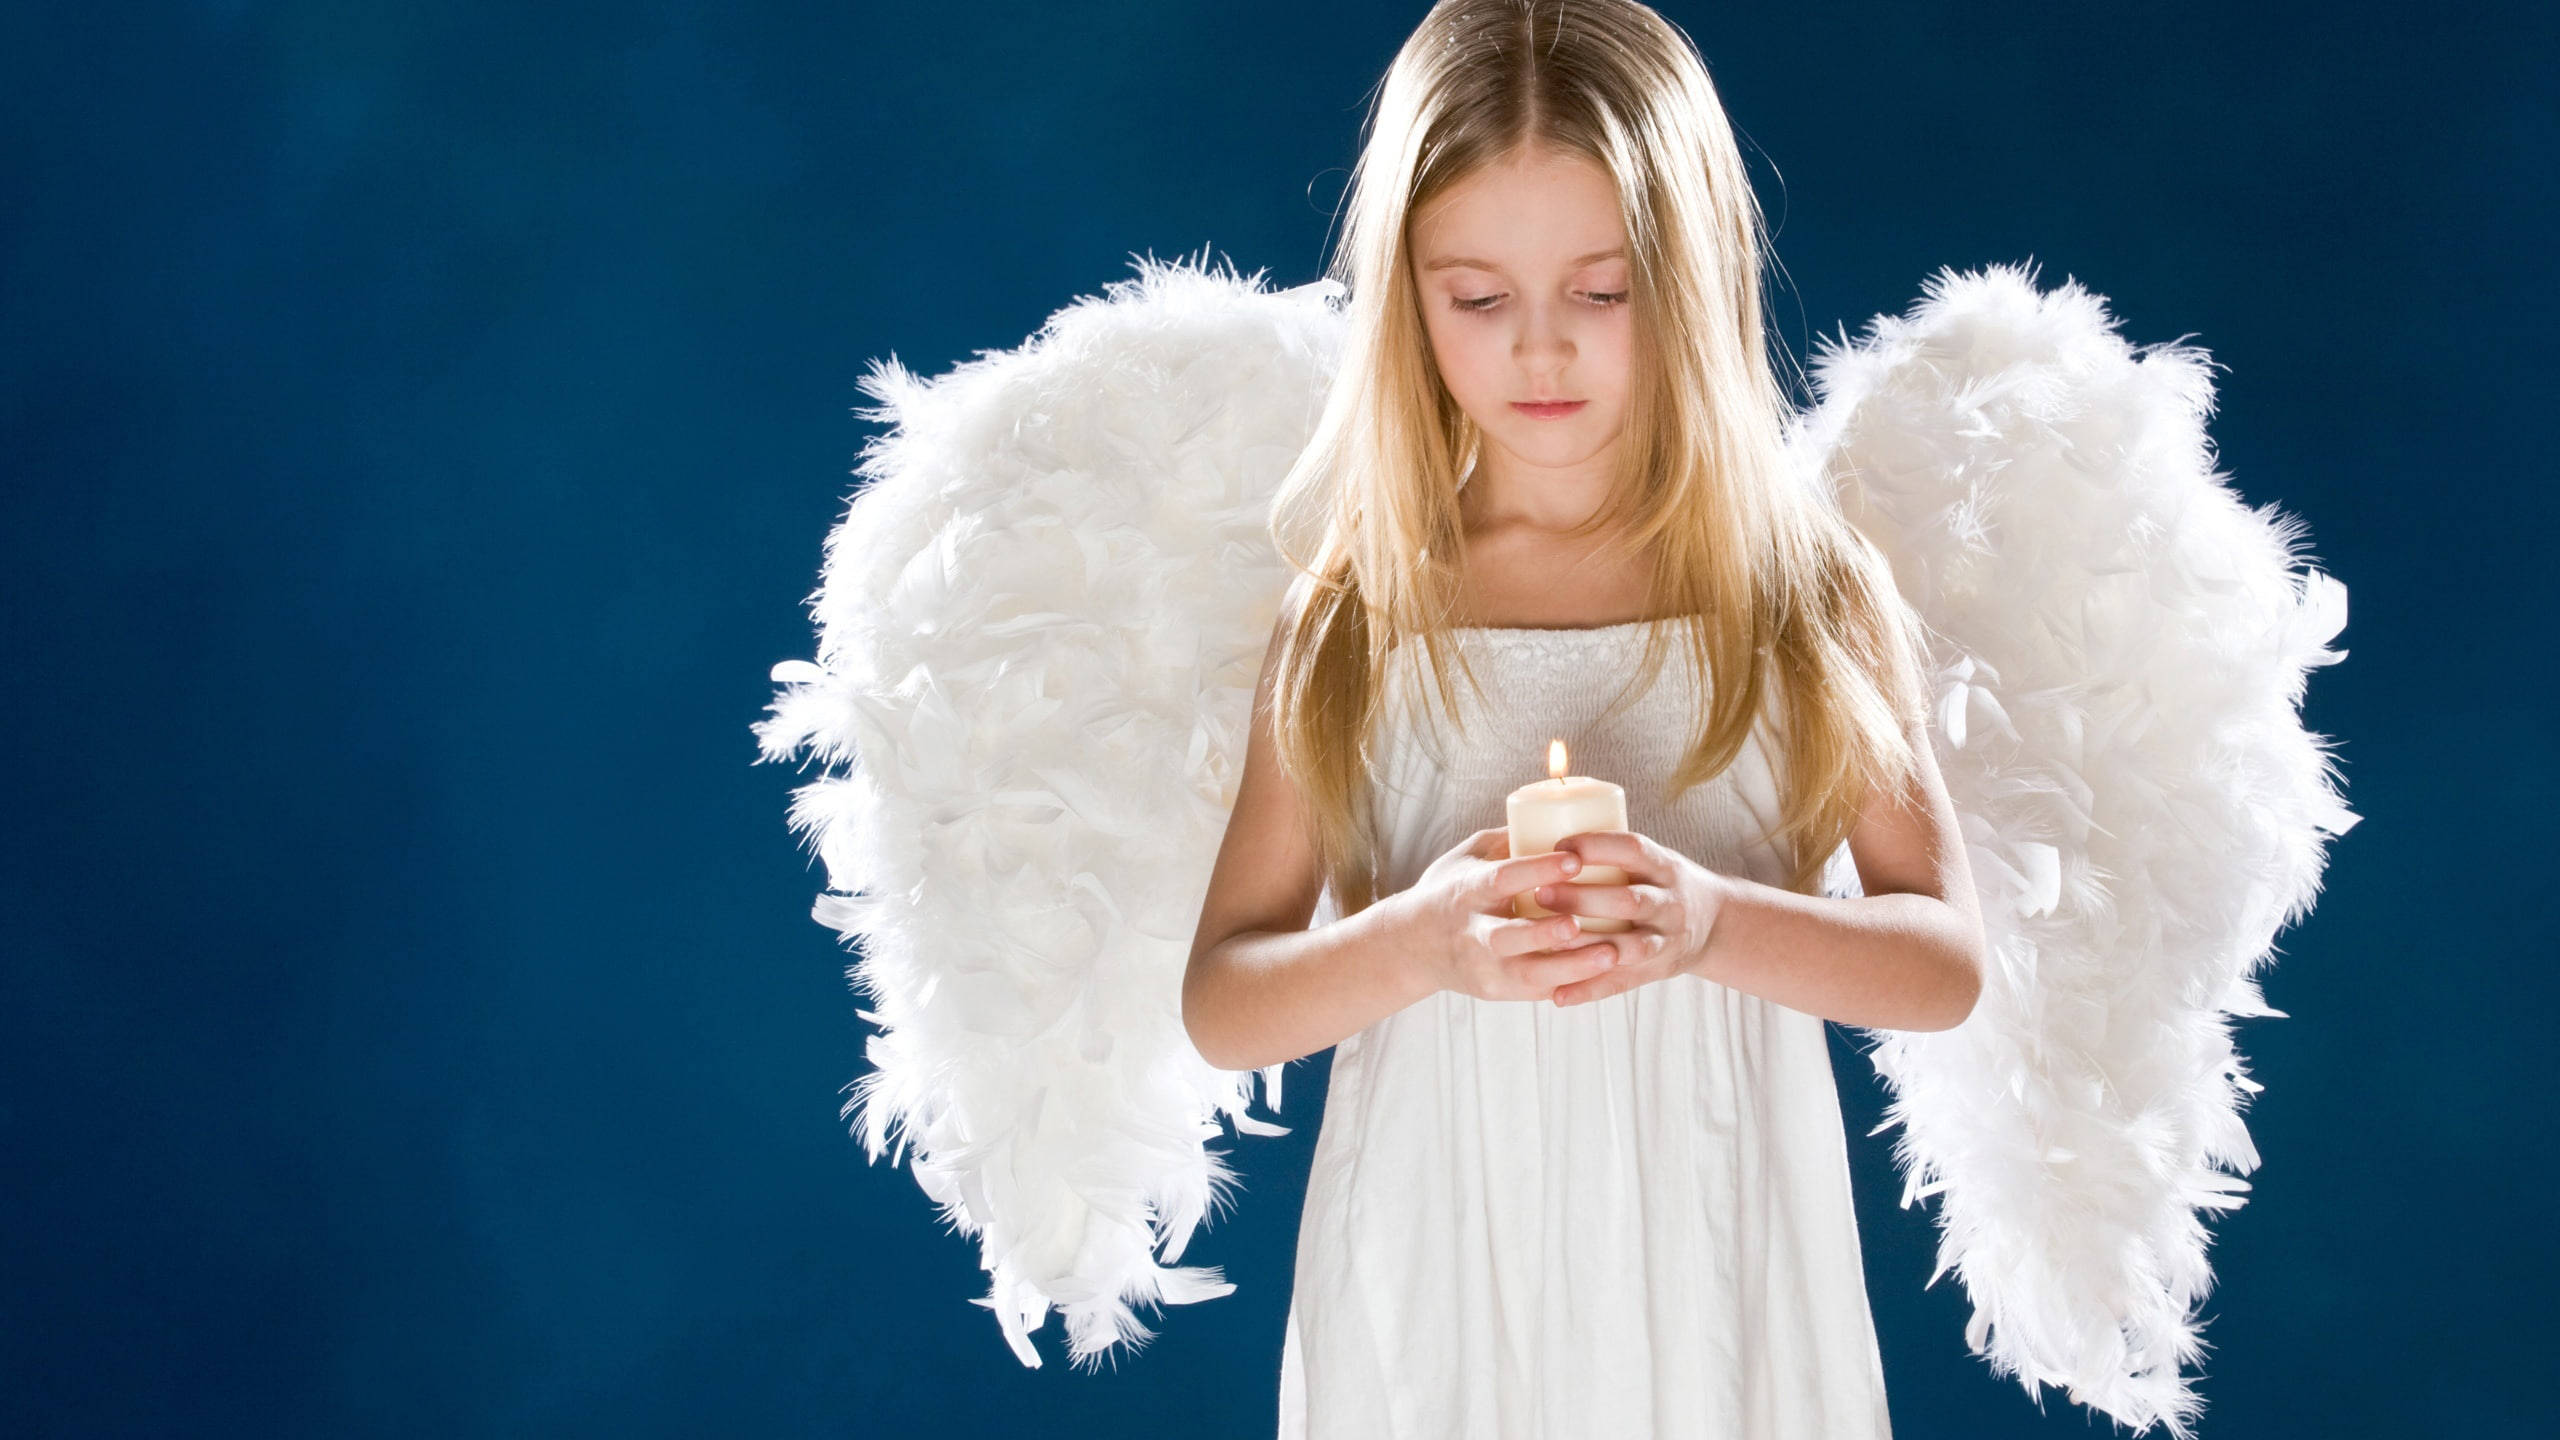 Girl With Wings Is Holding Candle With Hands Wearing White Dress In Blue Wallpaper HD